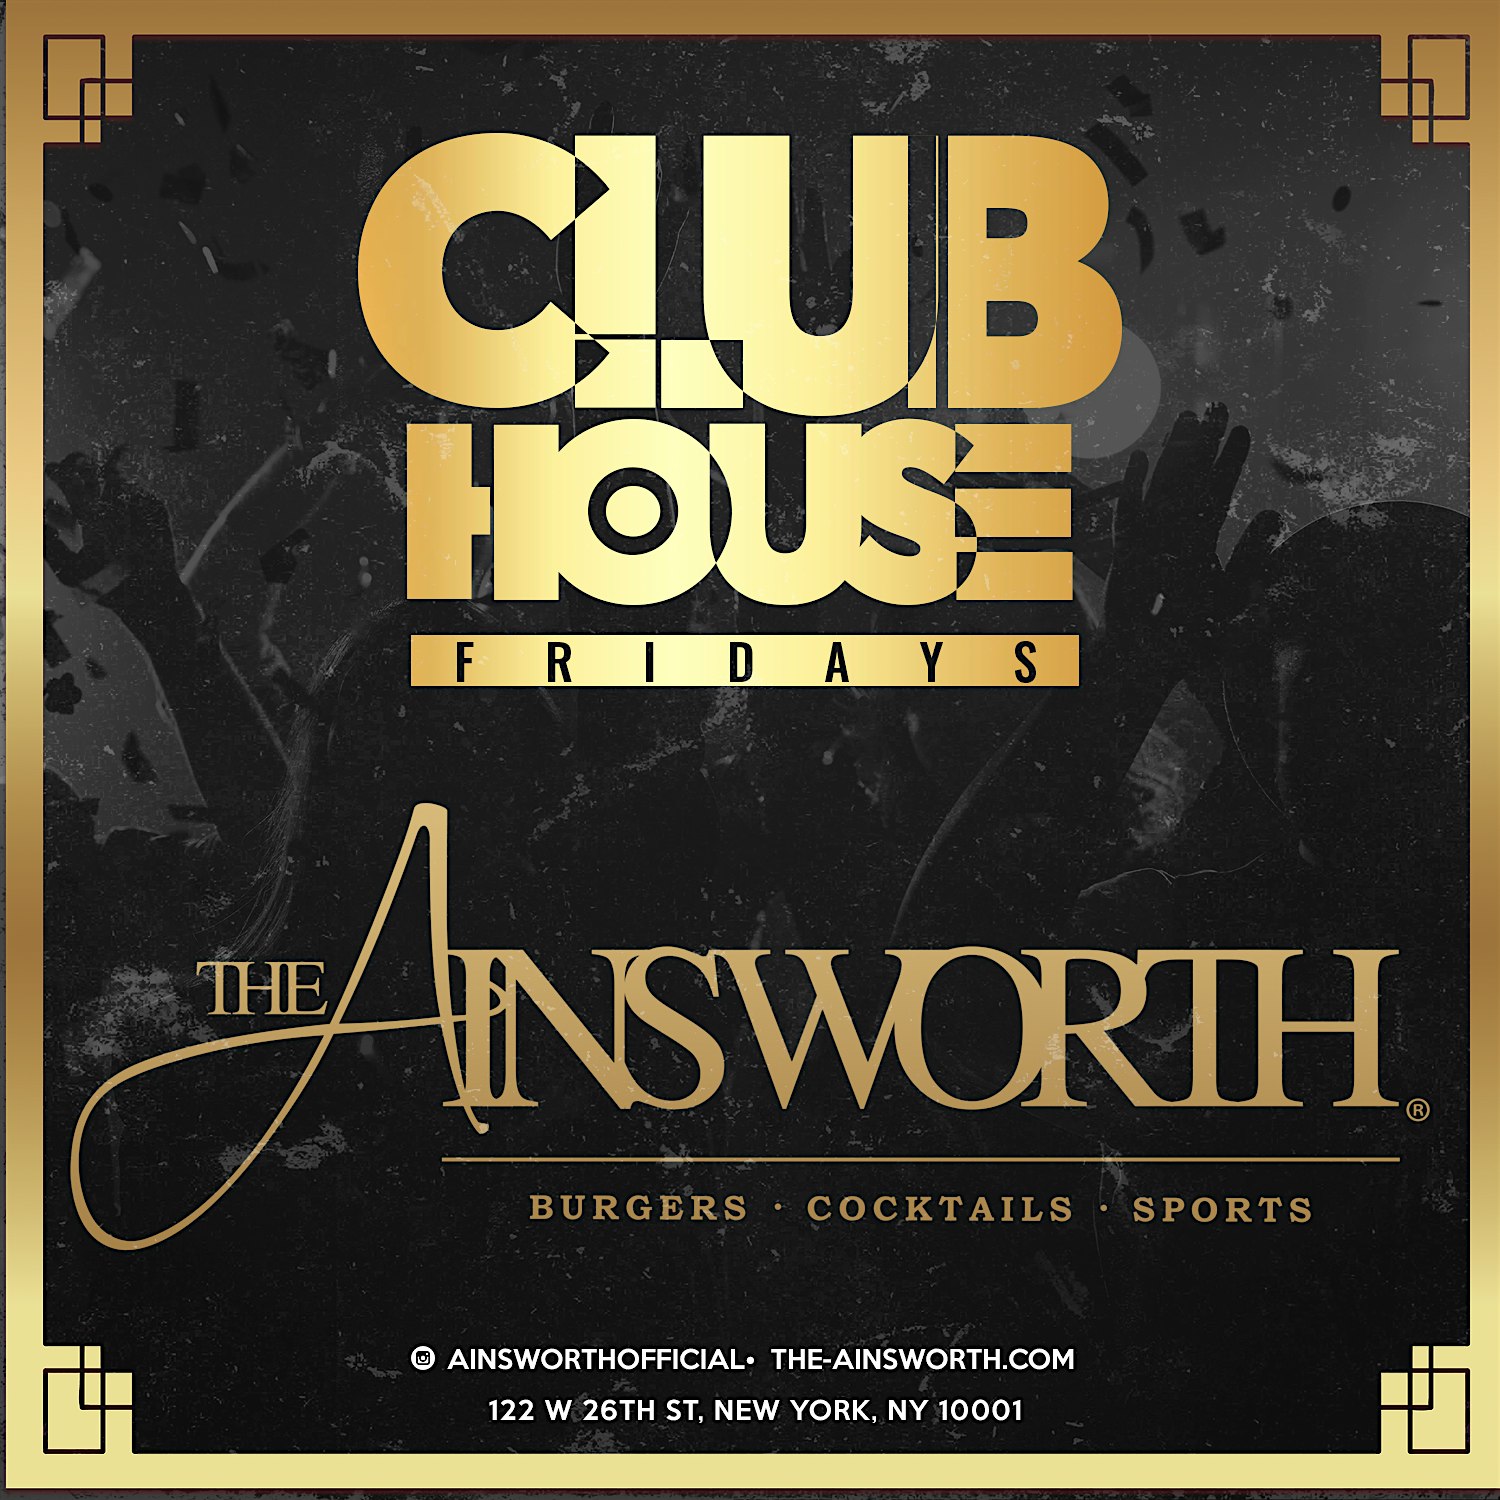 ClubHouse Fridays @ The Ainsworth Nyc